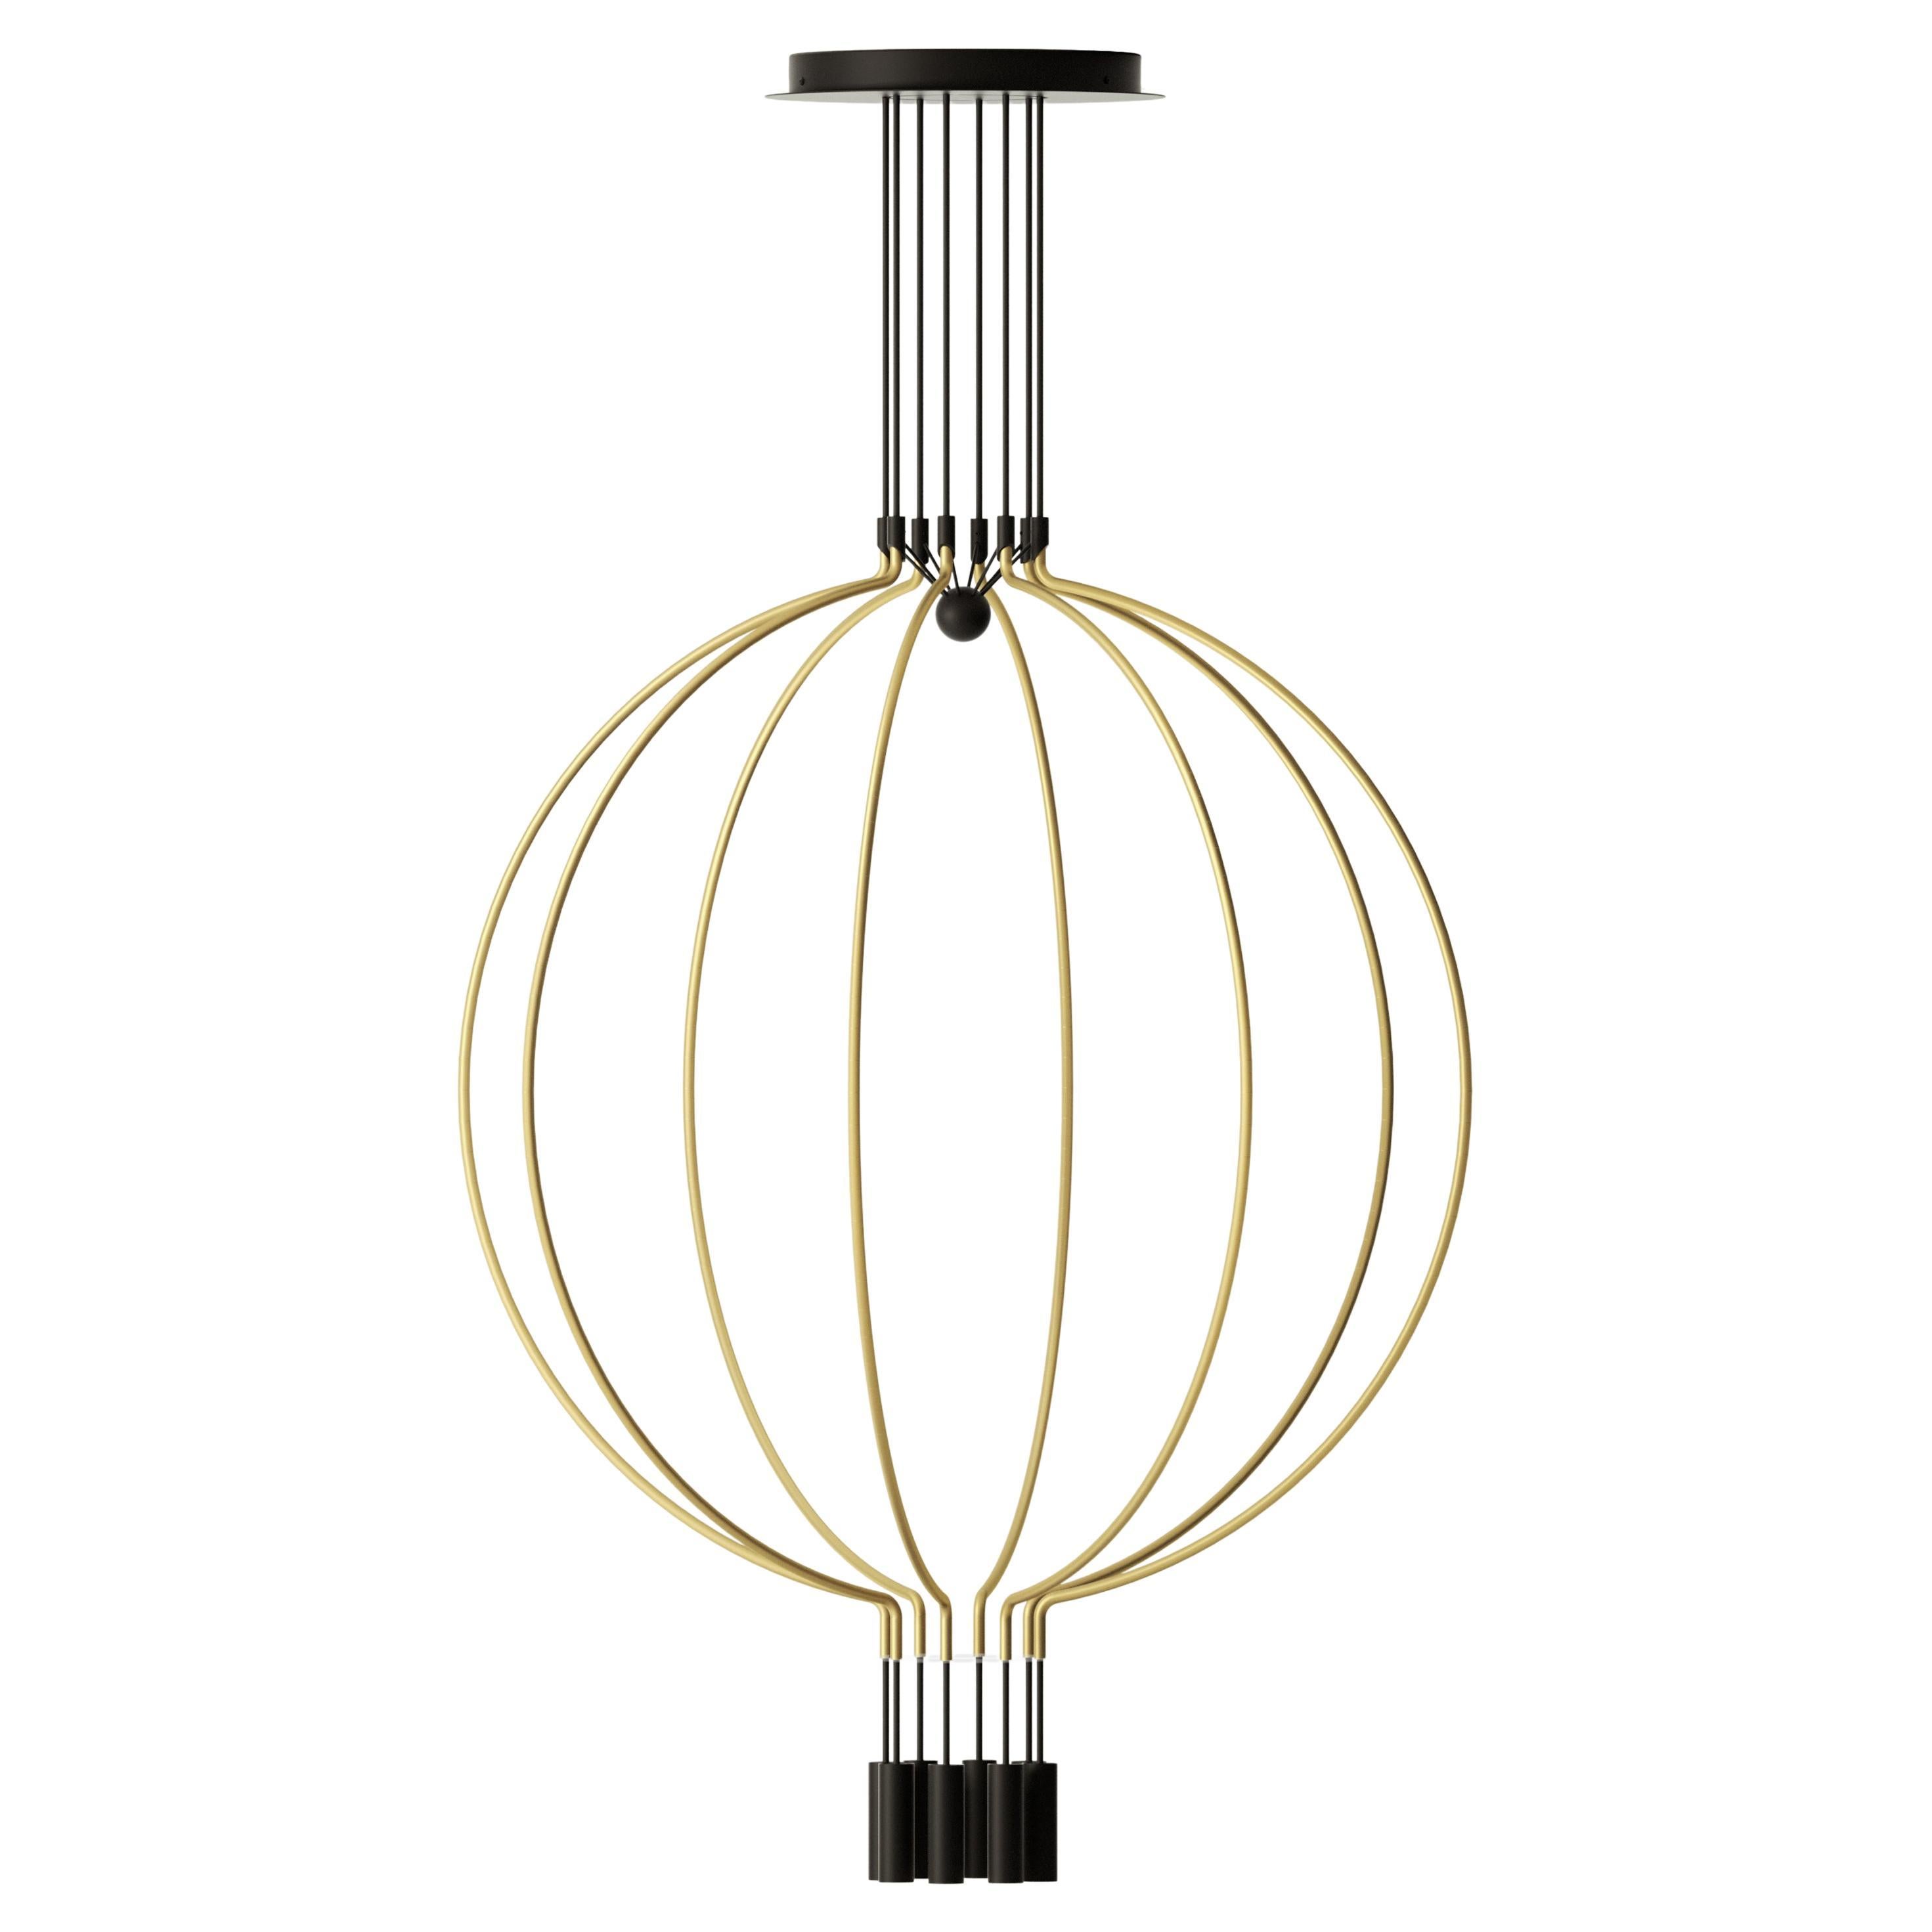 Axolight Liaison Model G8 Pendant Lamp in Gold/Black by Sara Moroni For Sale